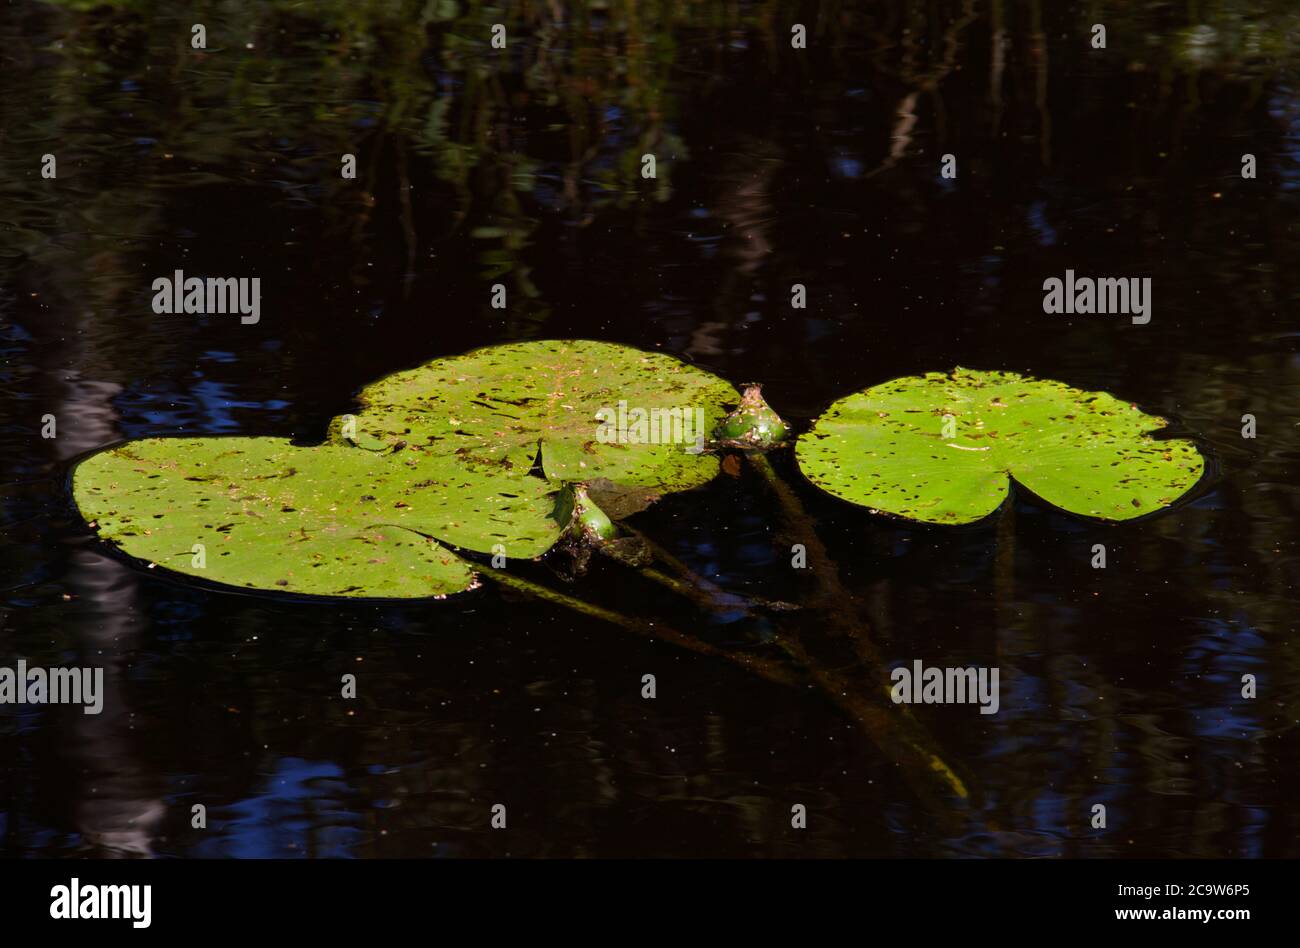 Three heart shaped leaves and one green bottle-shaped fruit of Yellow water-lily floating on dark, calm water Stock Photo